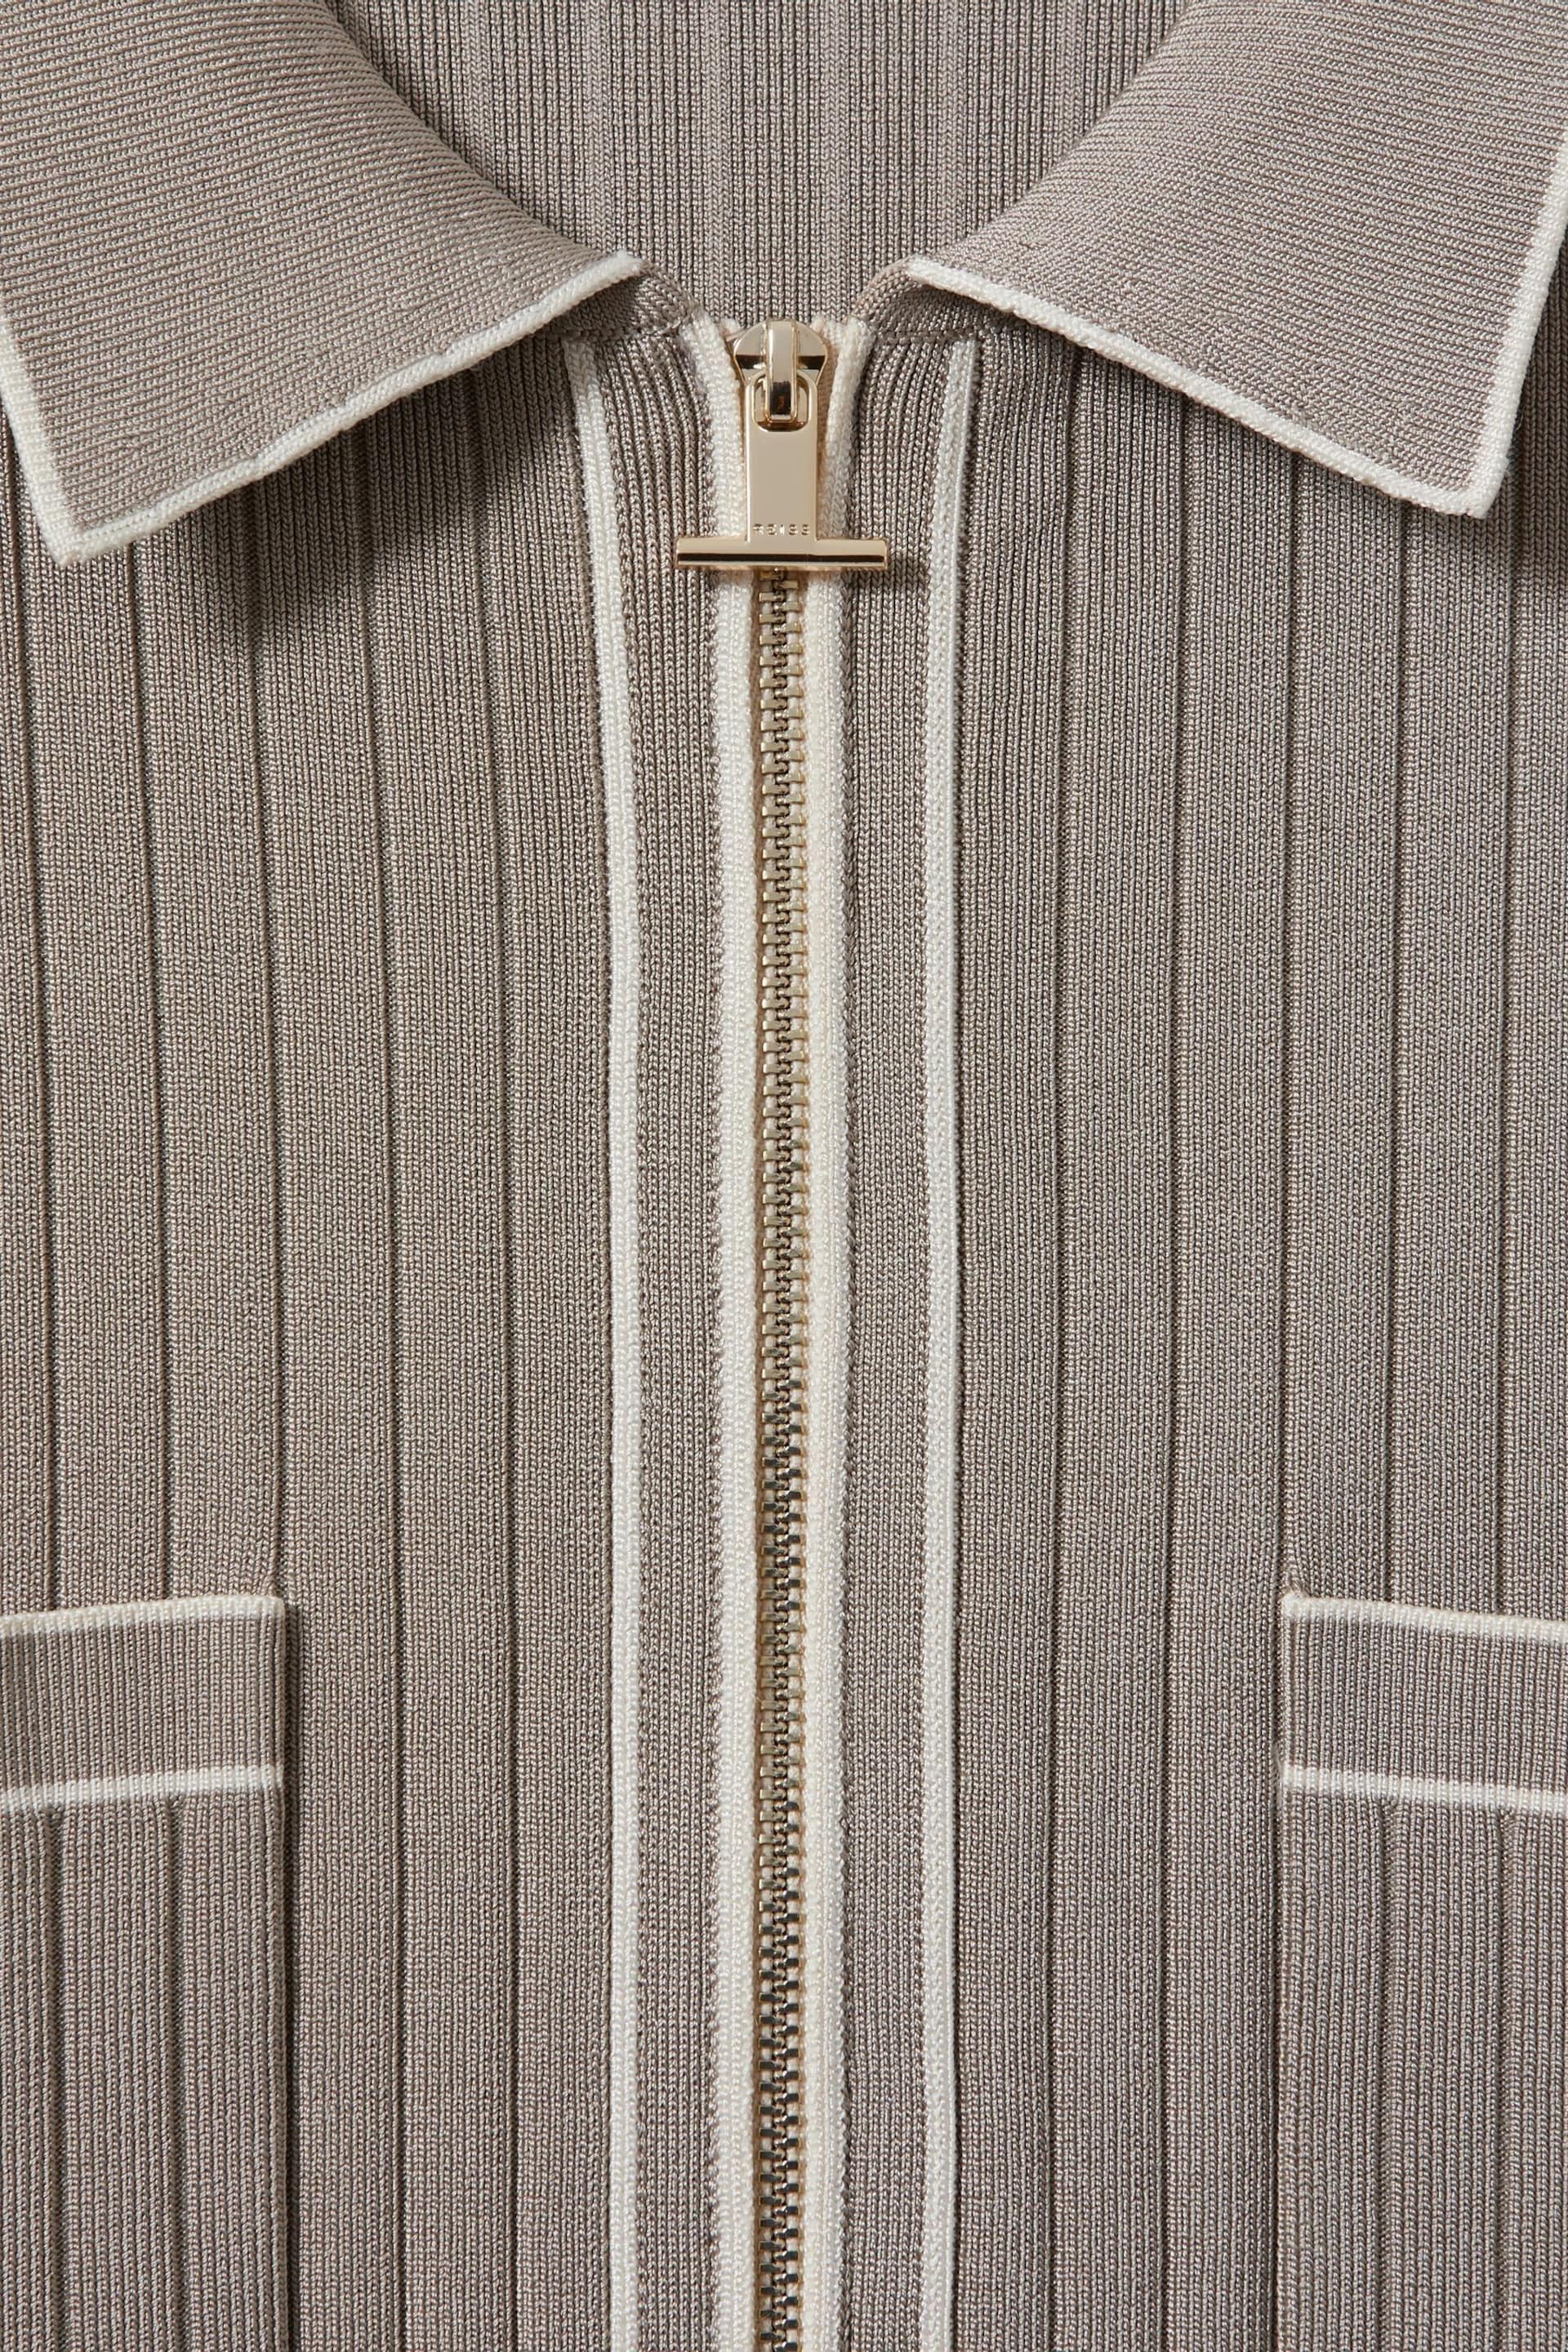 Reiss Stone Christophe Ribbed Dual Zip-Front Shirt - Image 6 of 6